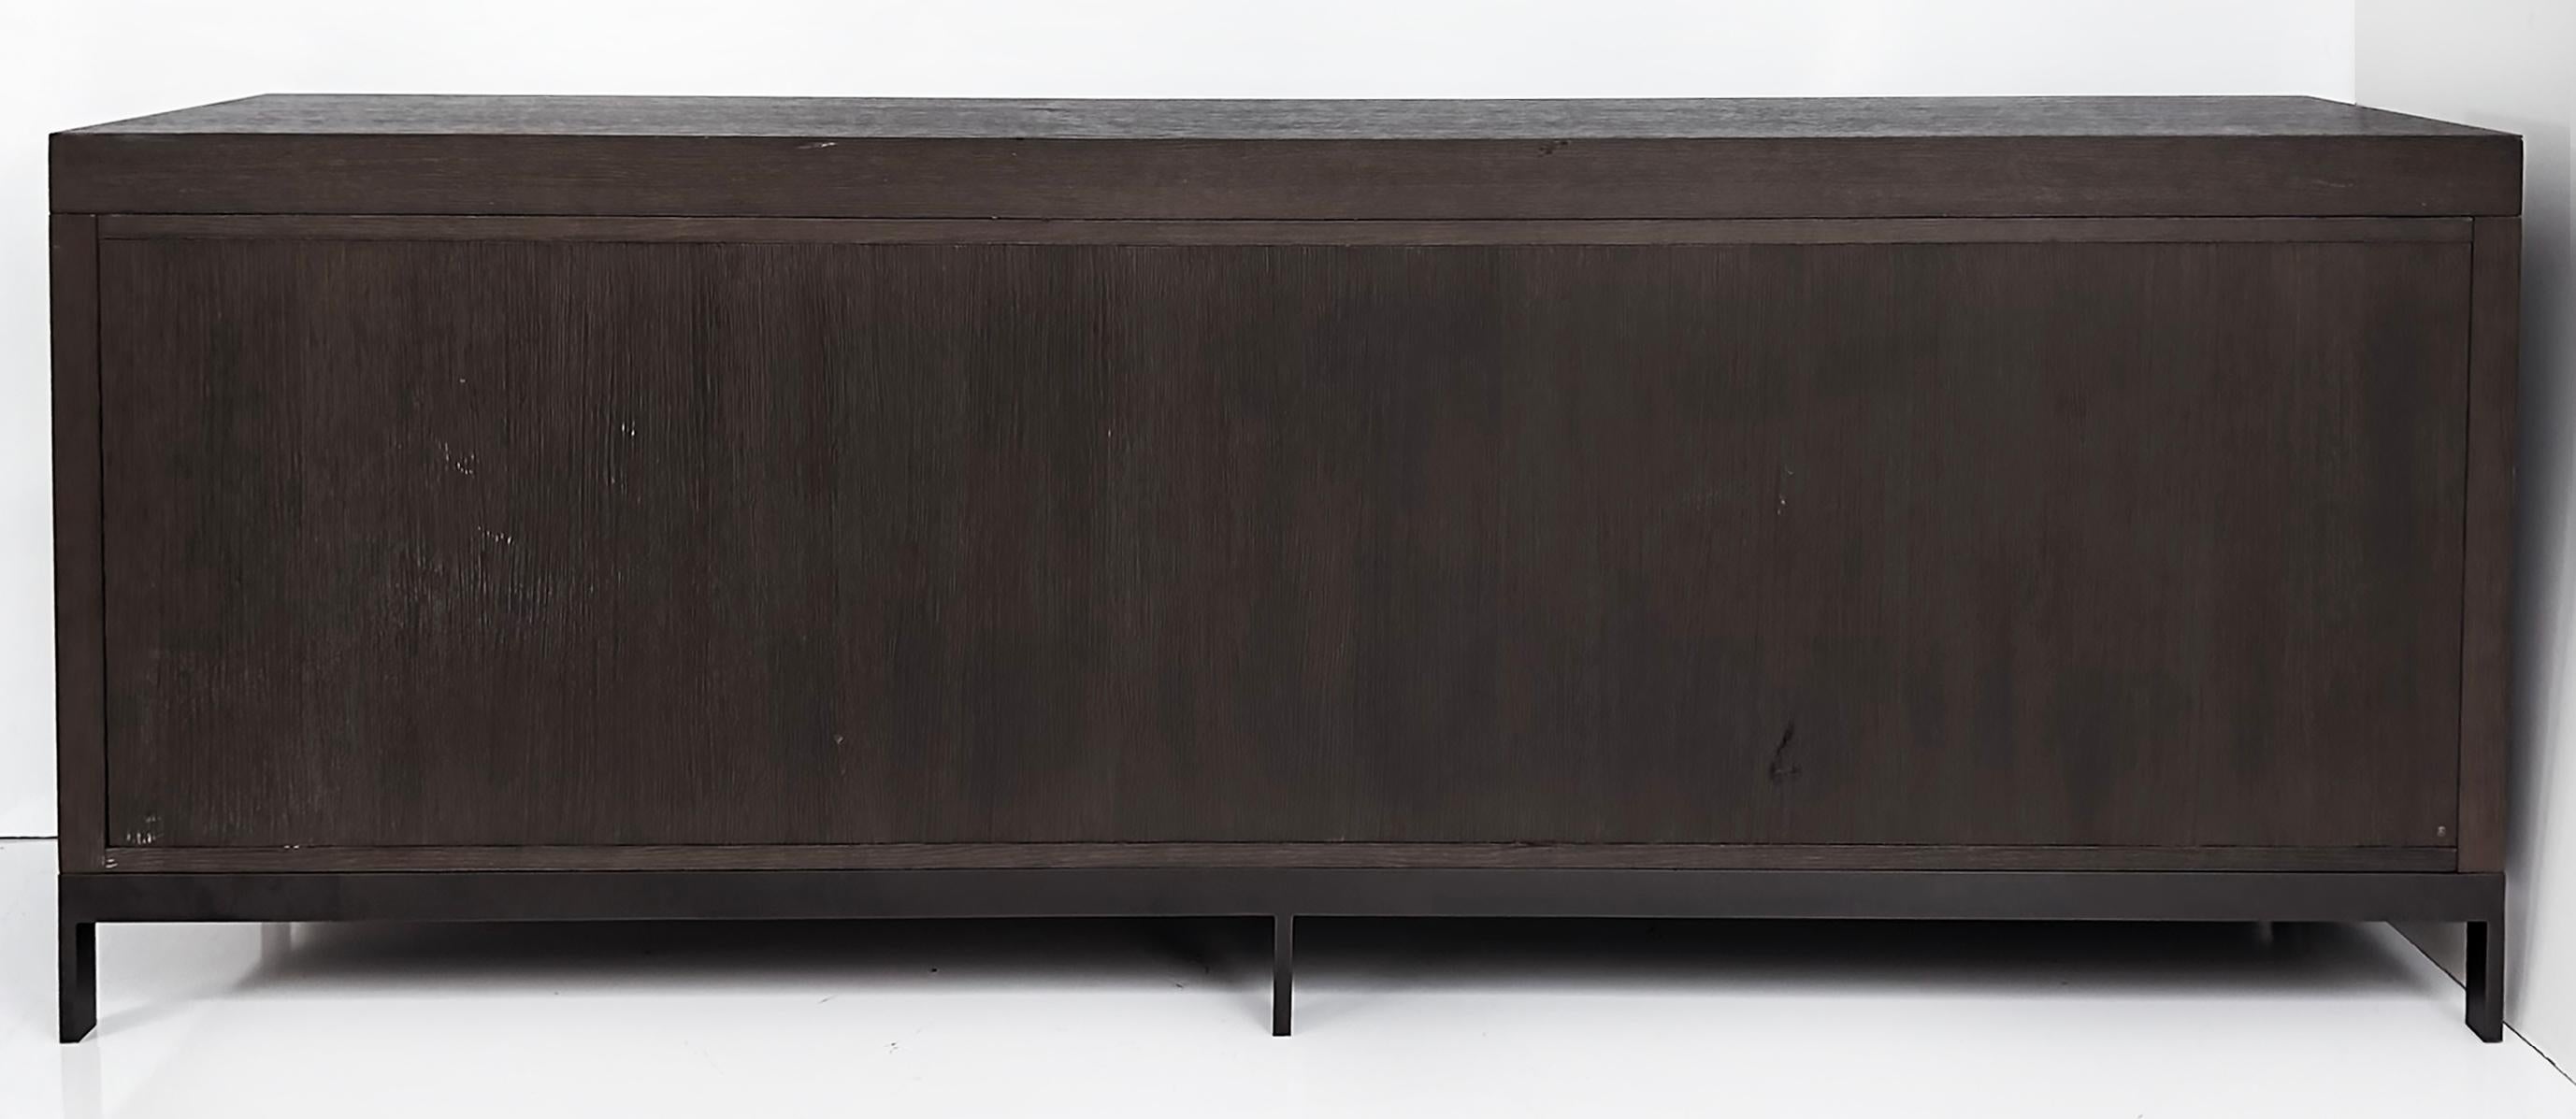 Christian Liaigre Tangris Credenza Cabinet, Sandblasted Oak and Metal 4